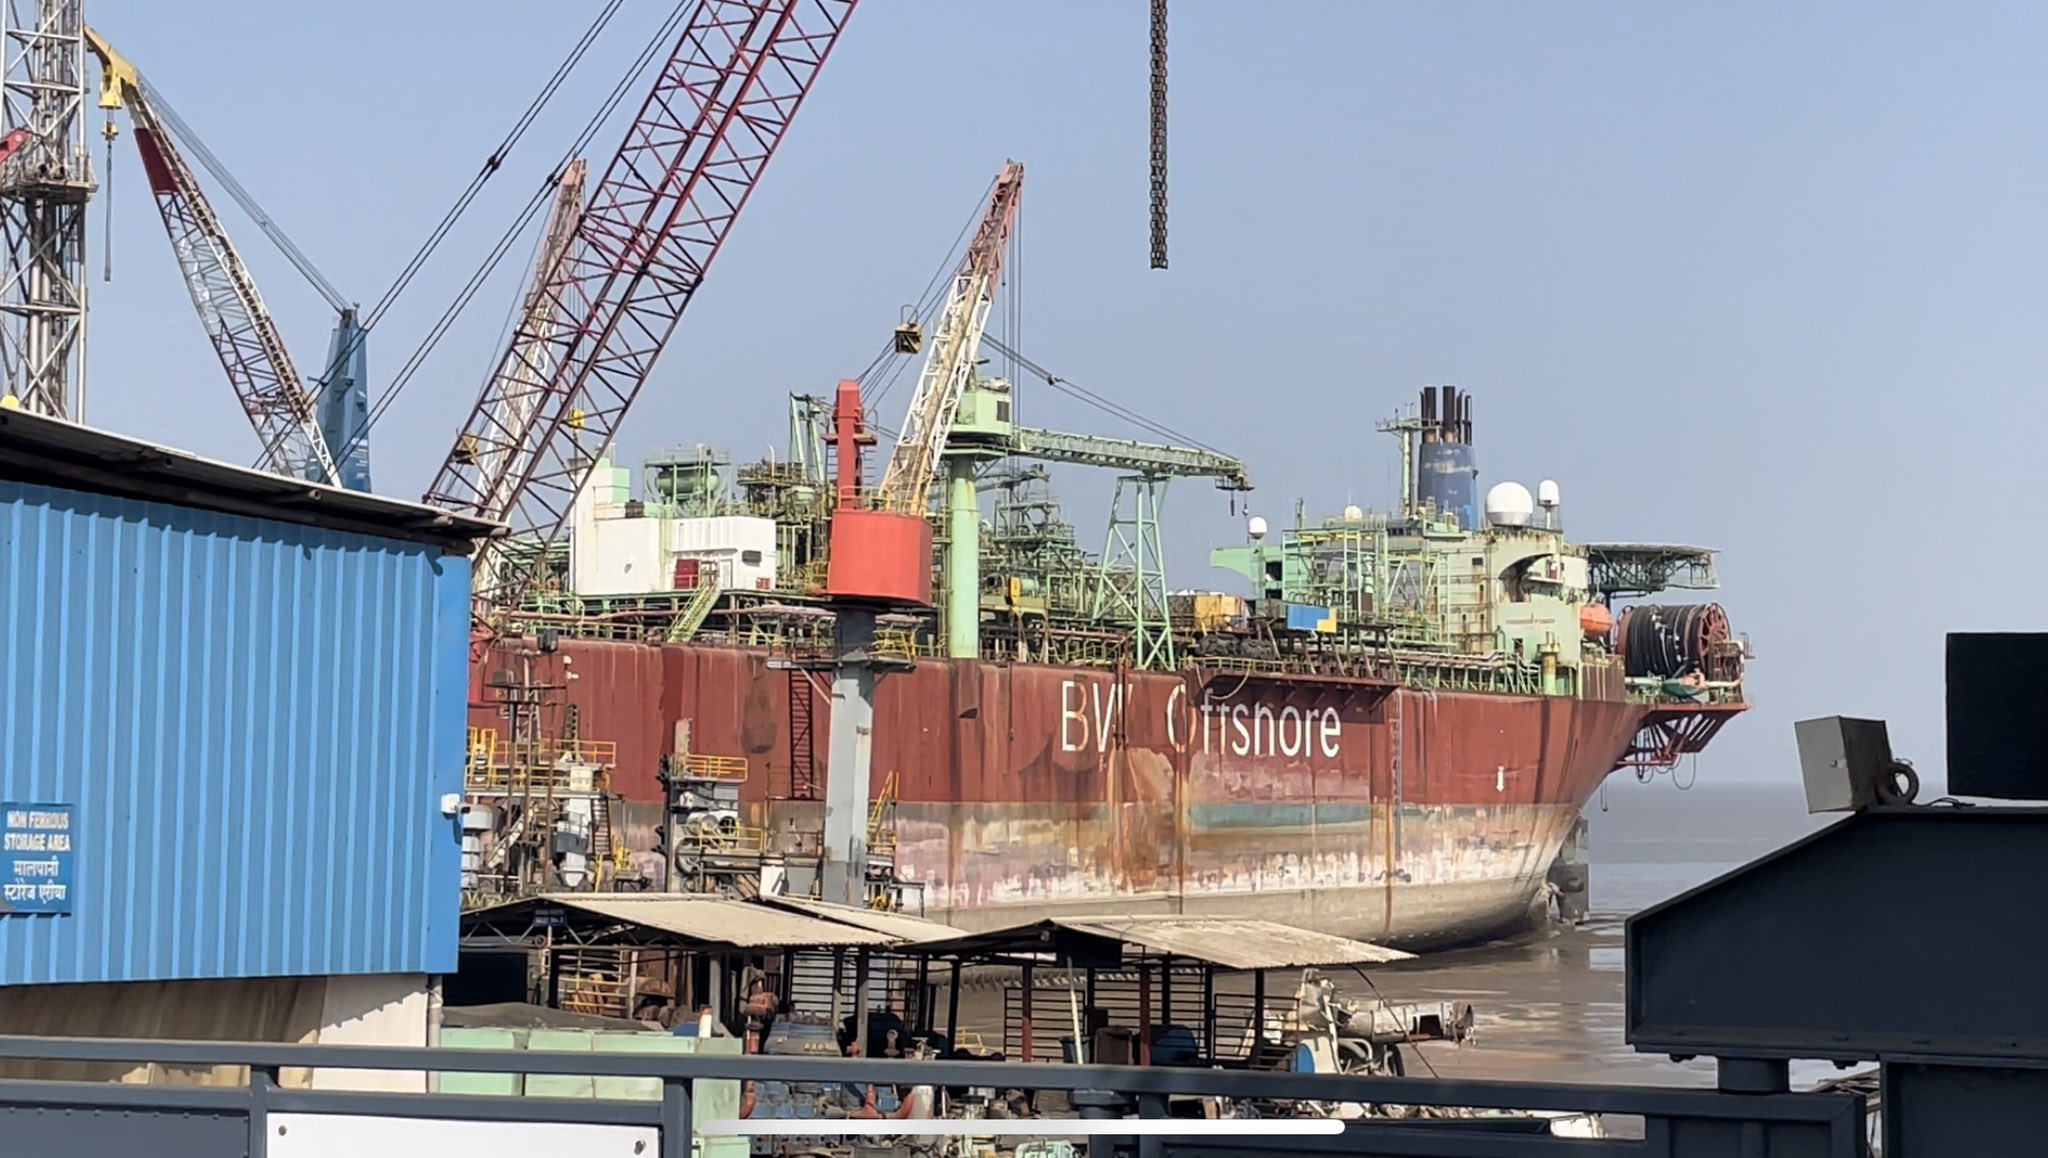 Press Release – Fatal accident at Alang yard during cutting of BW Offshore vessel